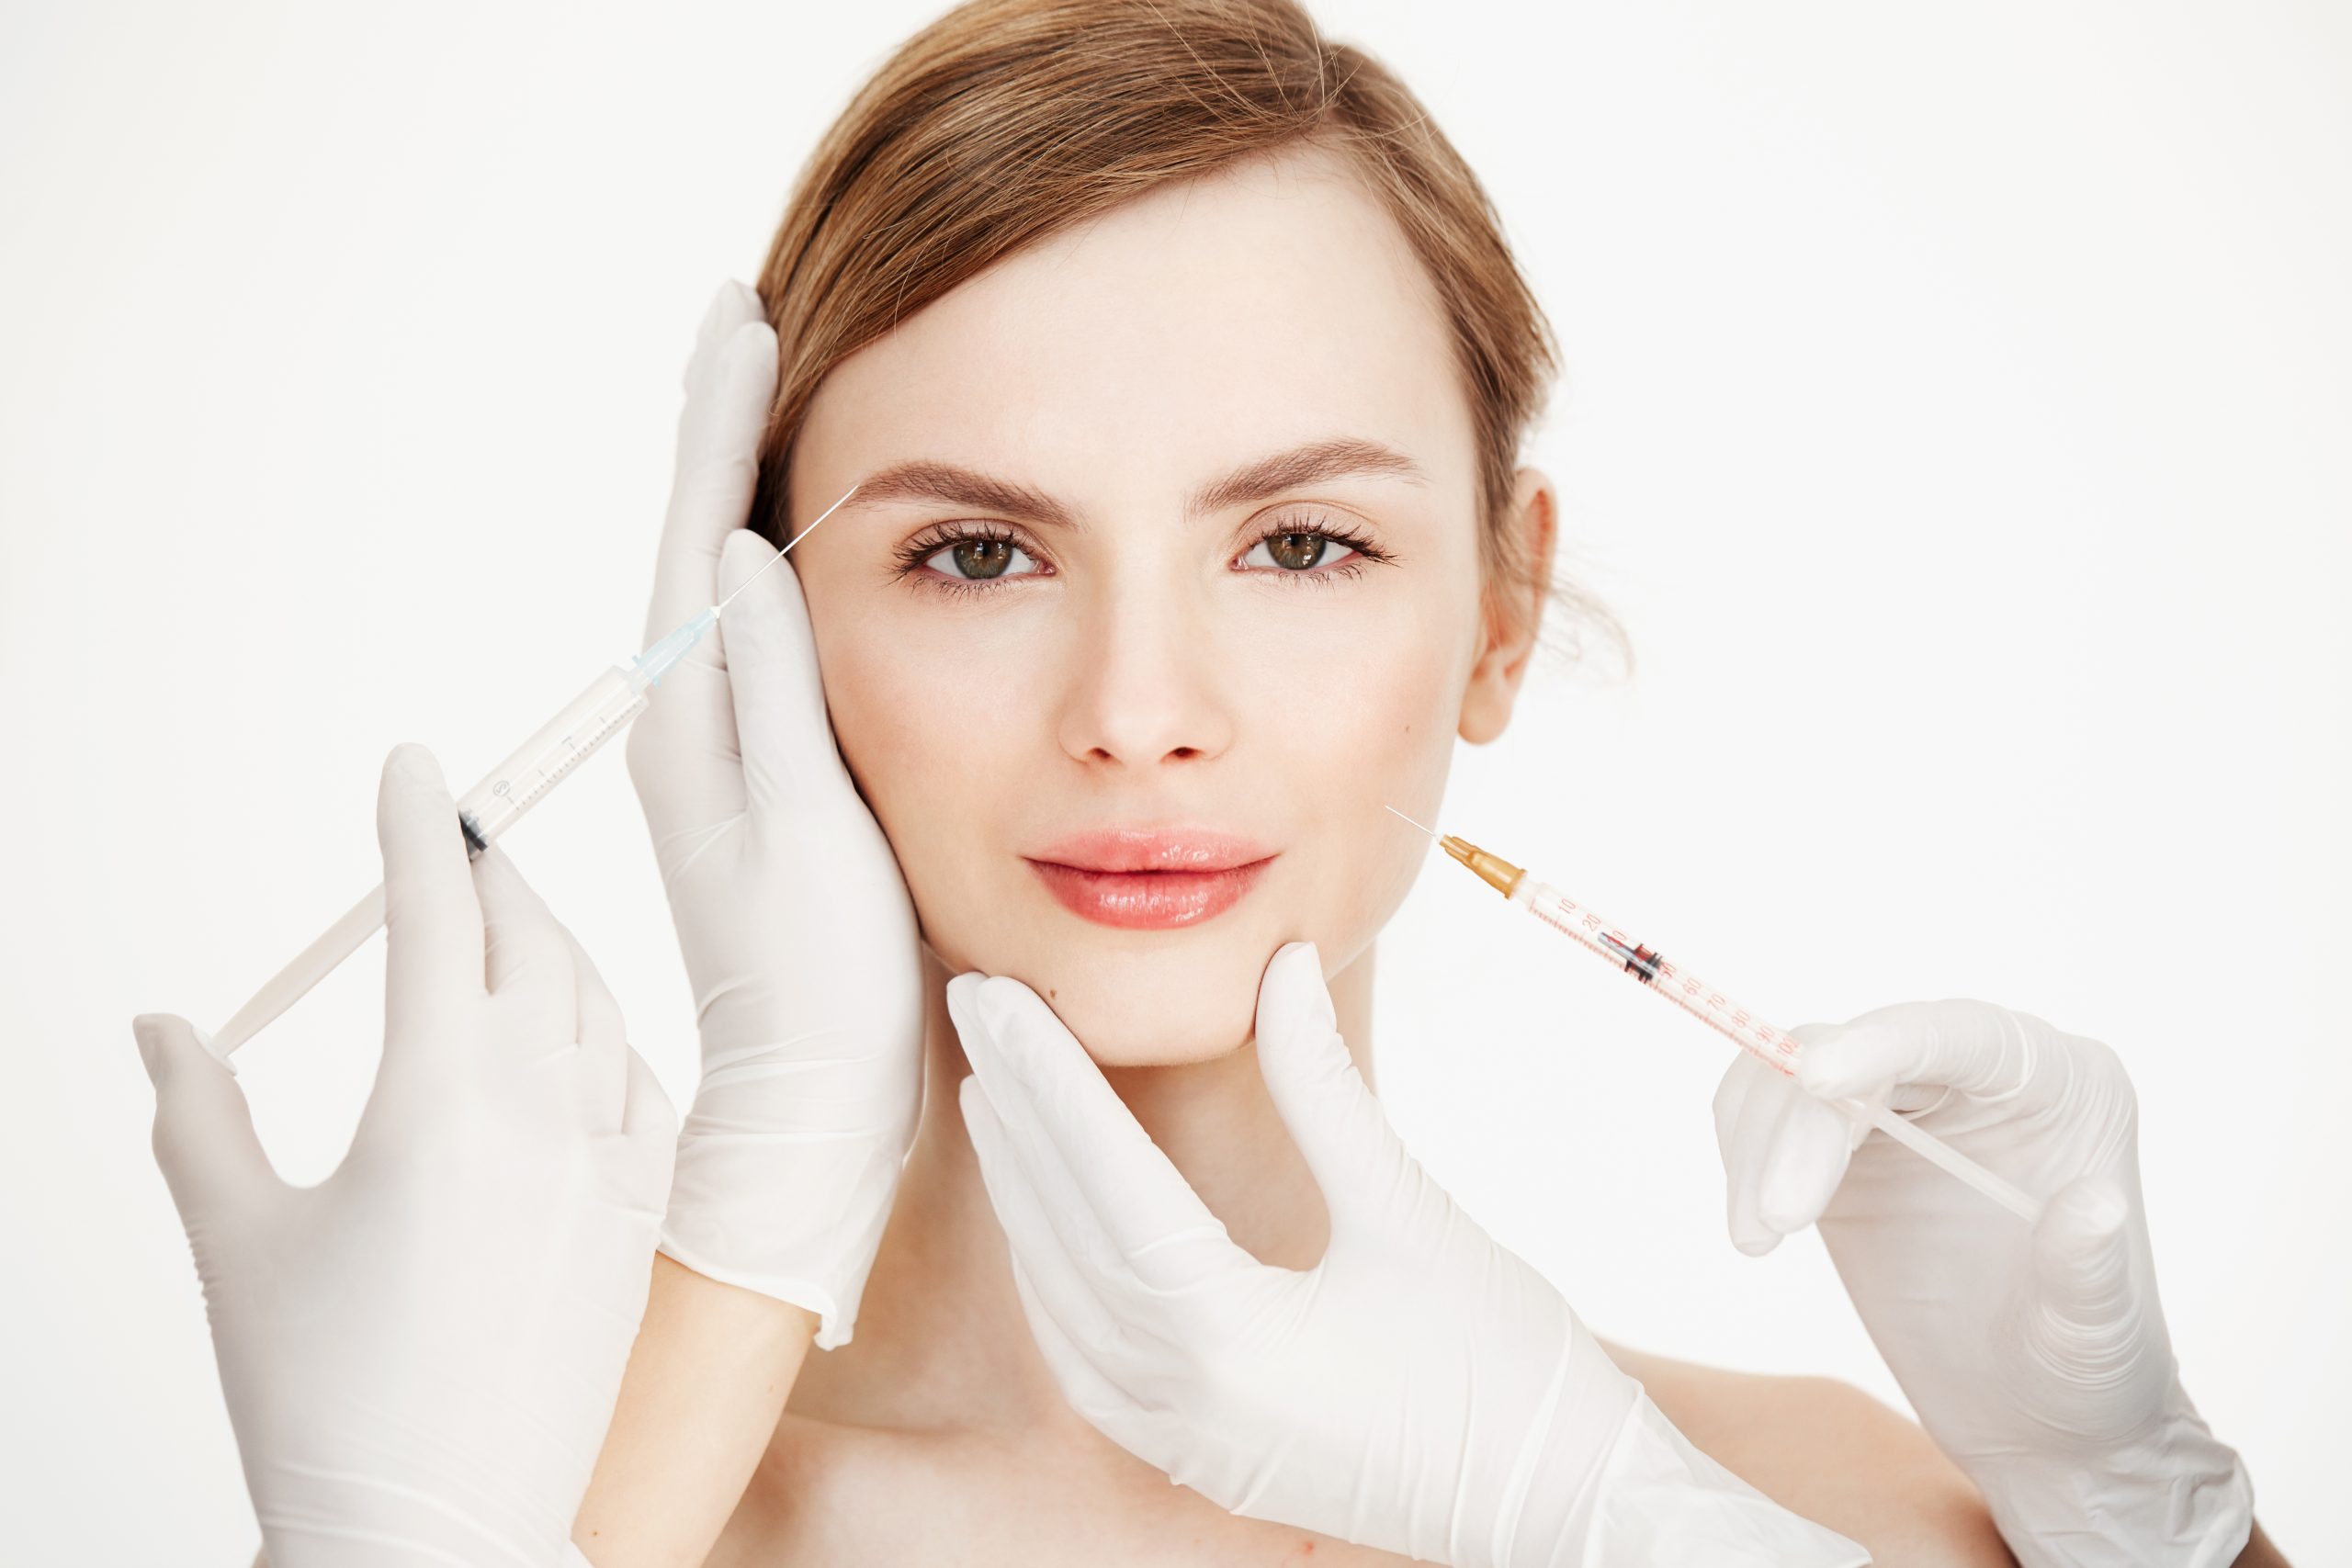 7 Reasons why people have cosmetic surgery